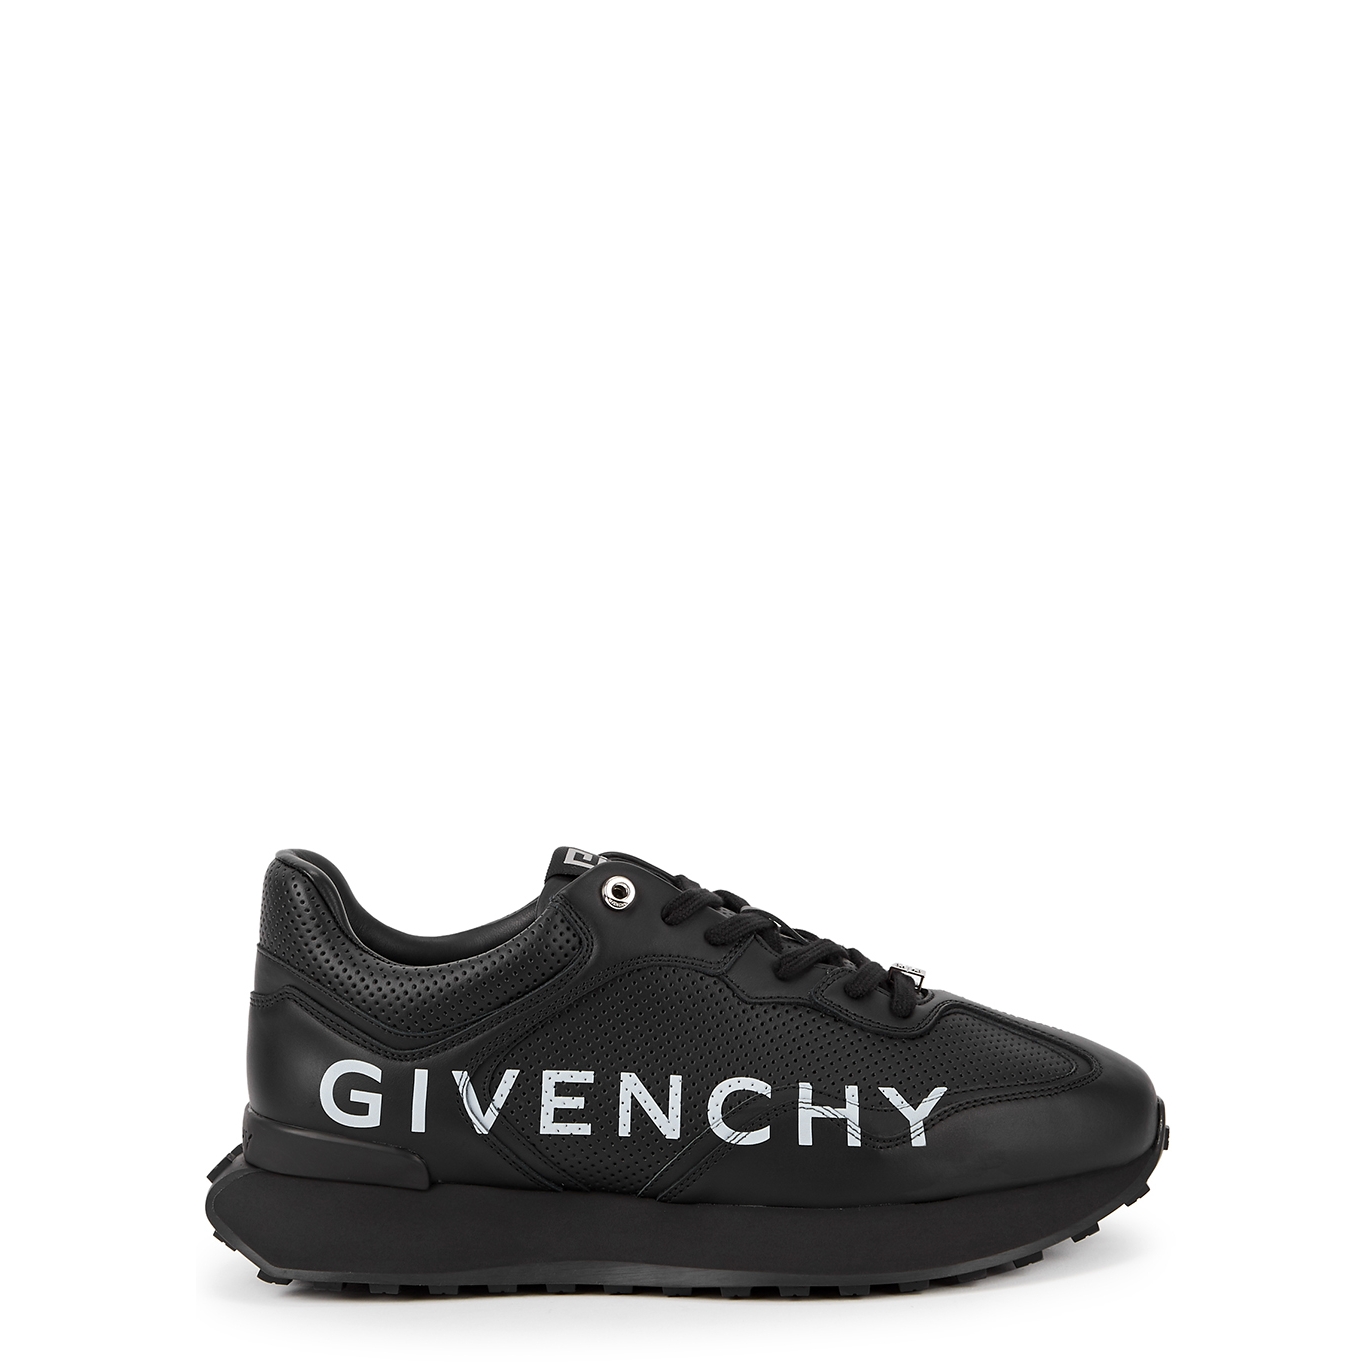 Givenchy Runner Black Leather Sneakers - 8